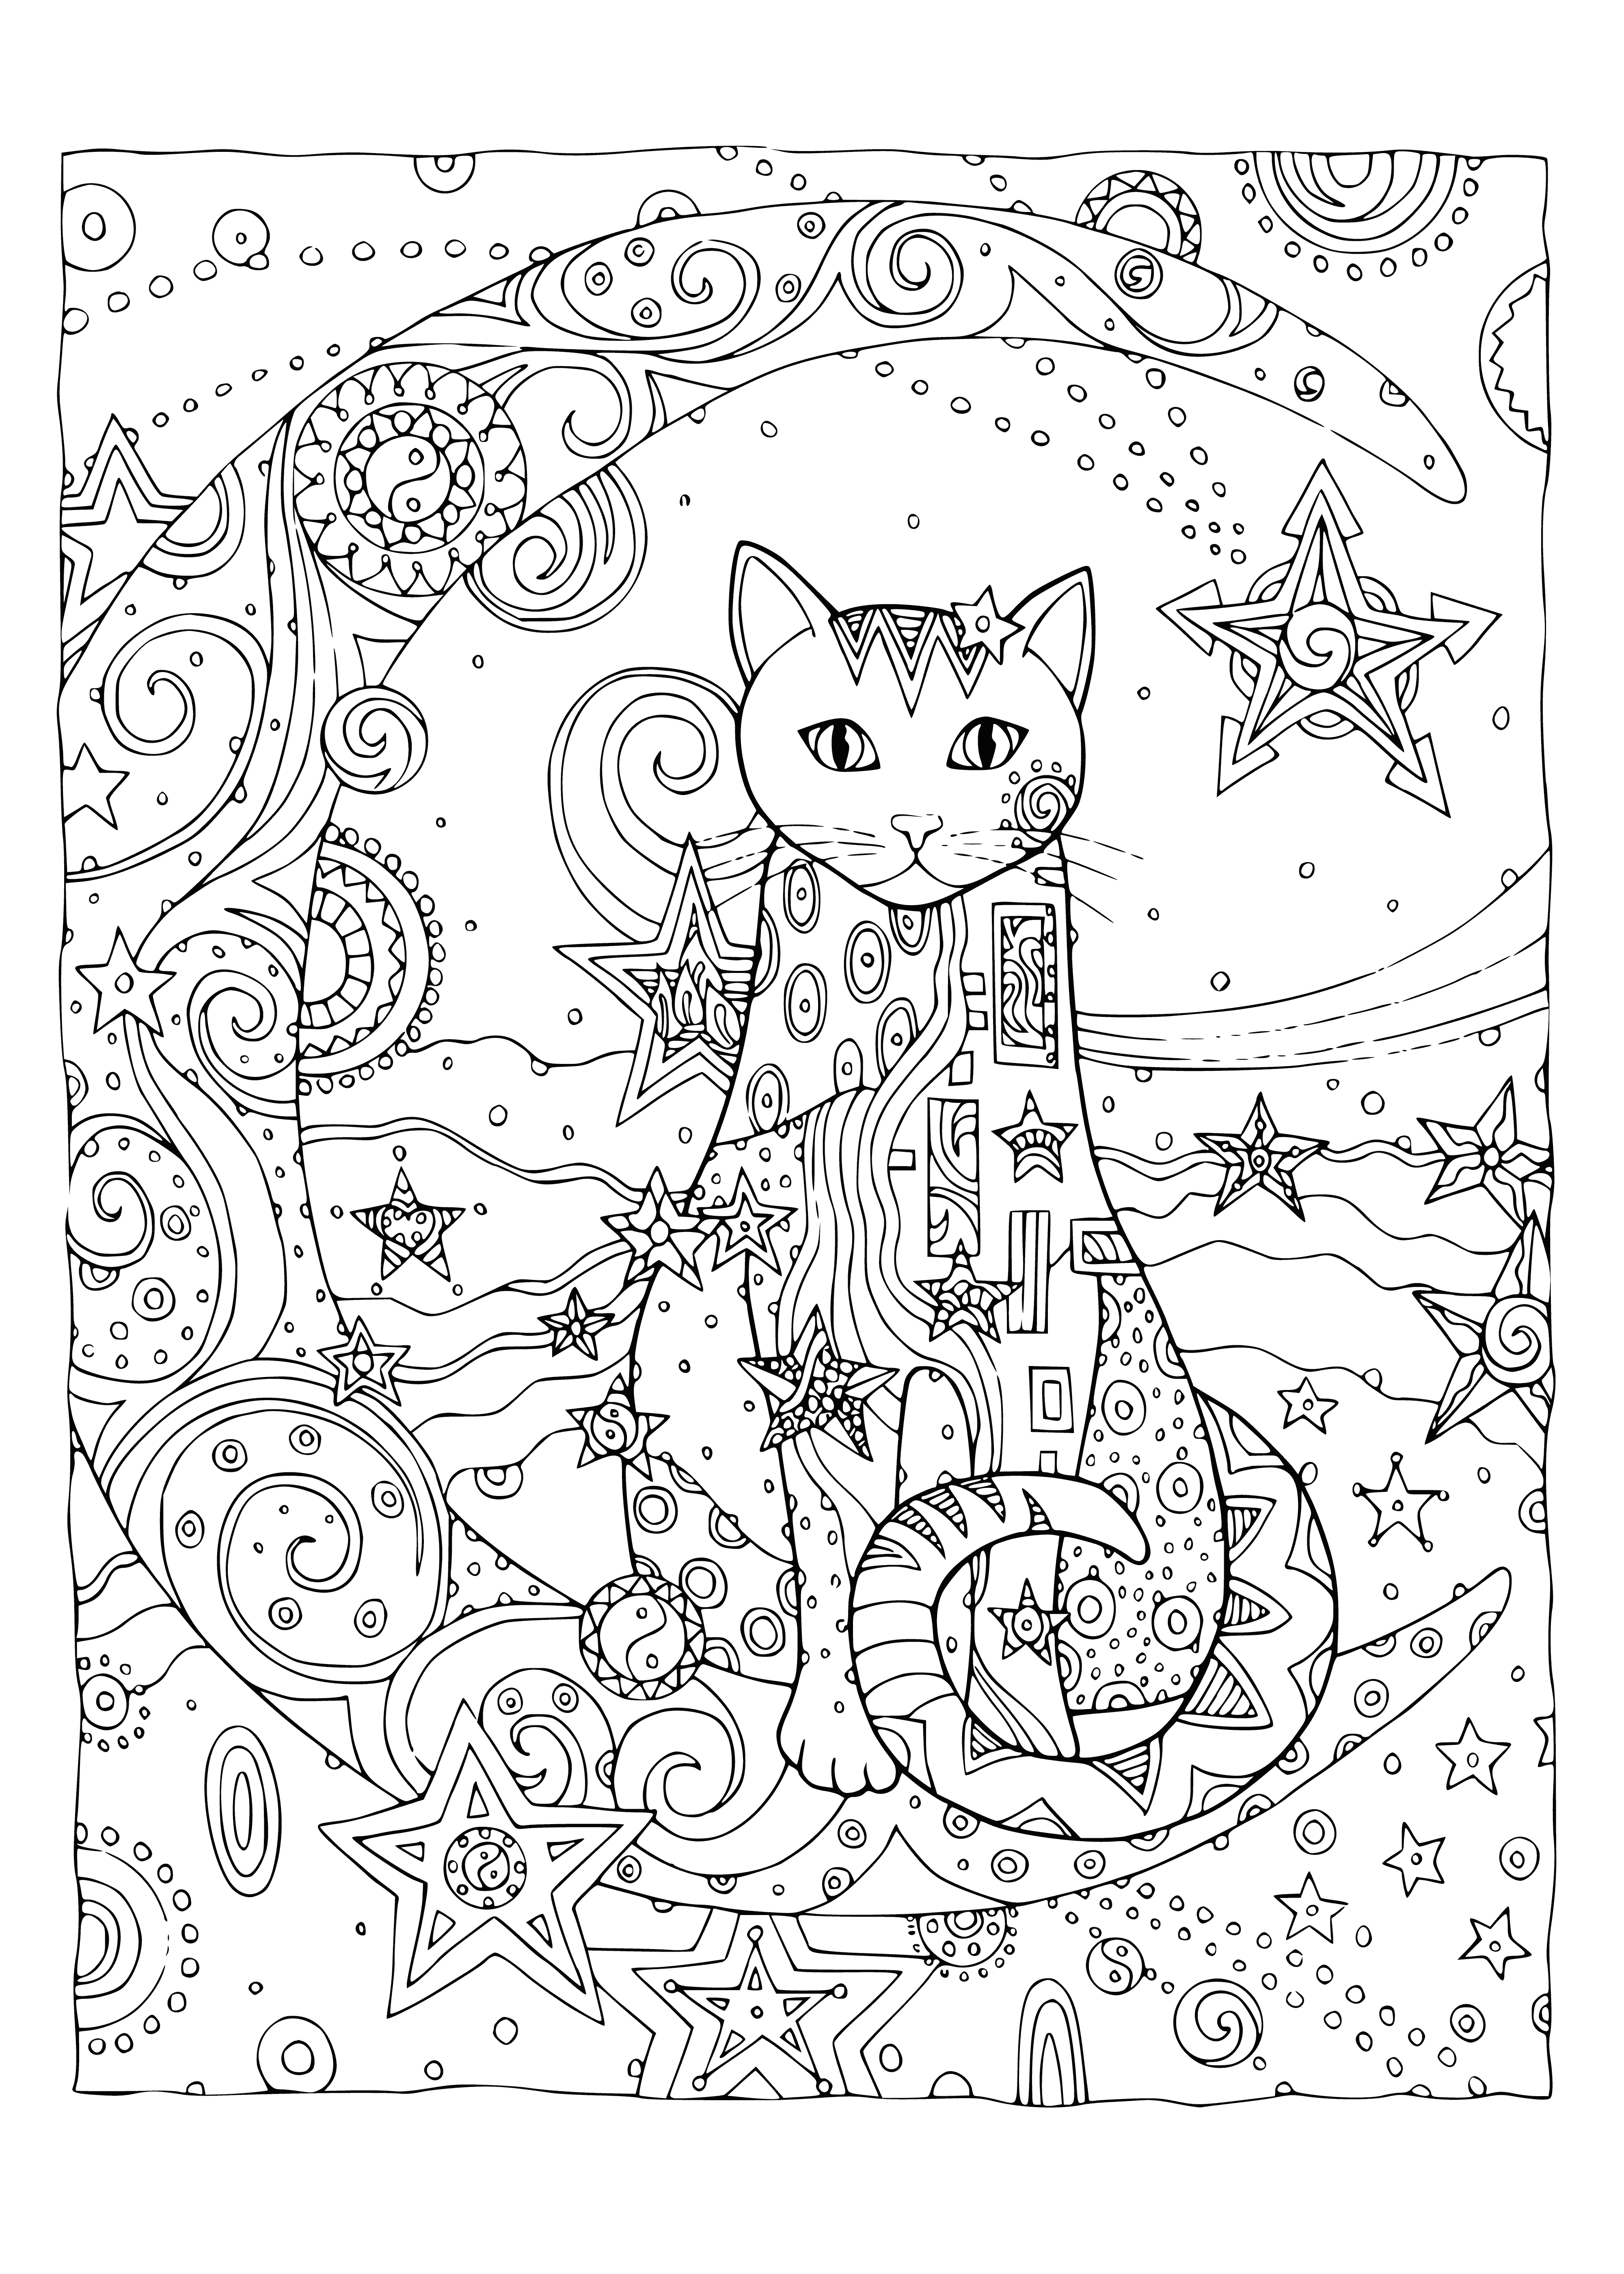 coloring page: Colorful cat with a moon & flowers in a wreath. Word "CAT" with small cat in "O" & "month” with moon in "O" on page. #coloringbooks